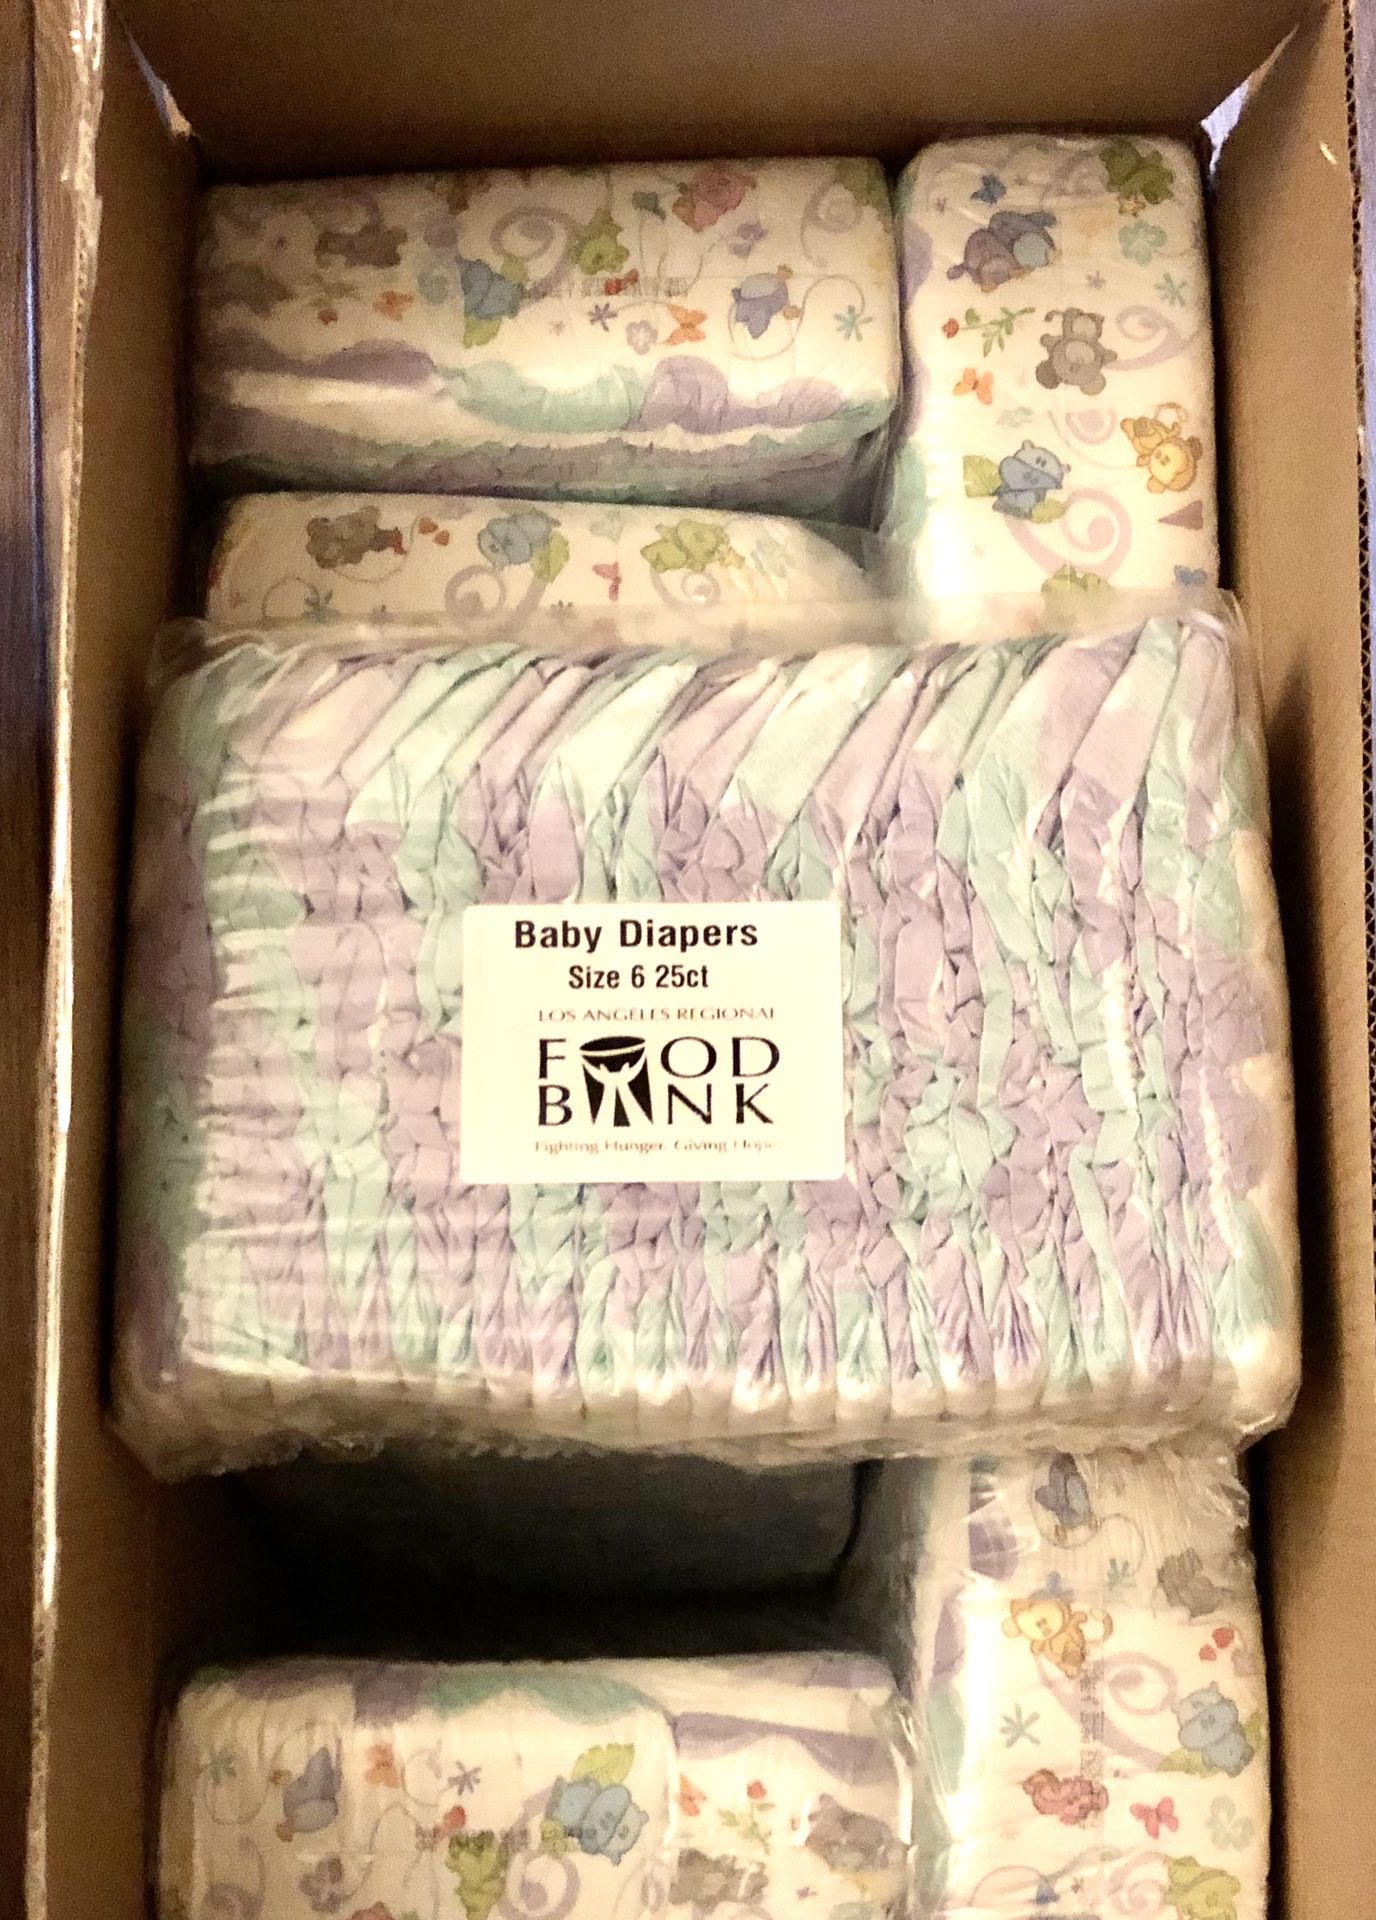 Baby diapers size 6